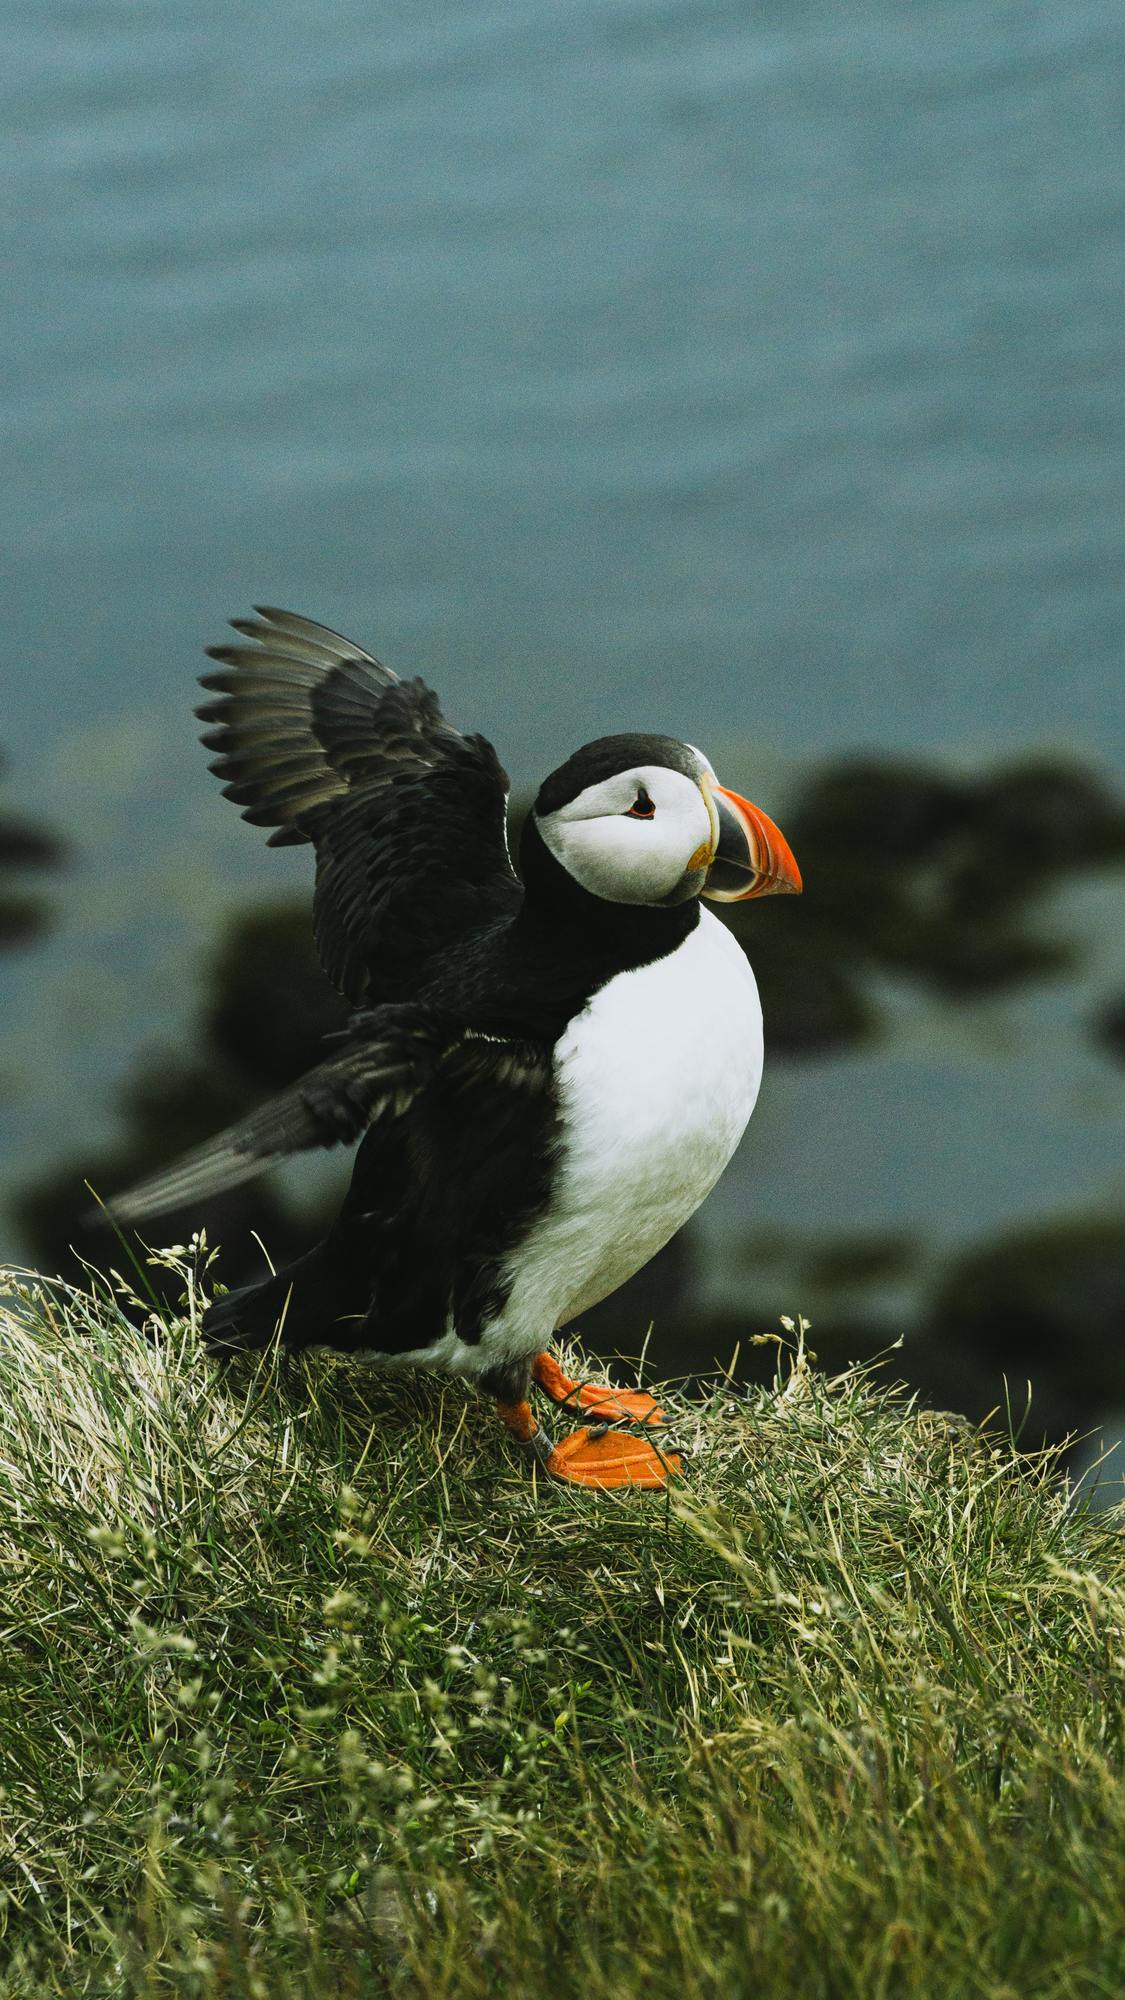 puffin spreads its wings on a cliff